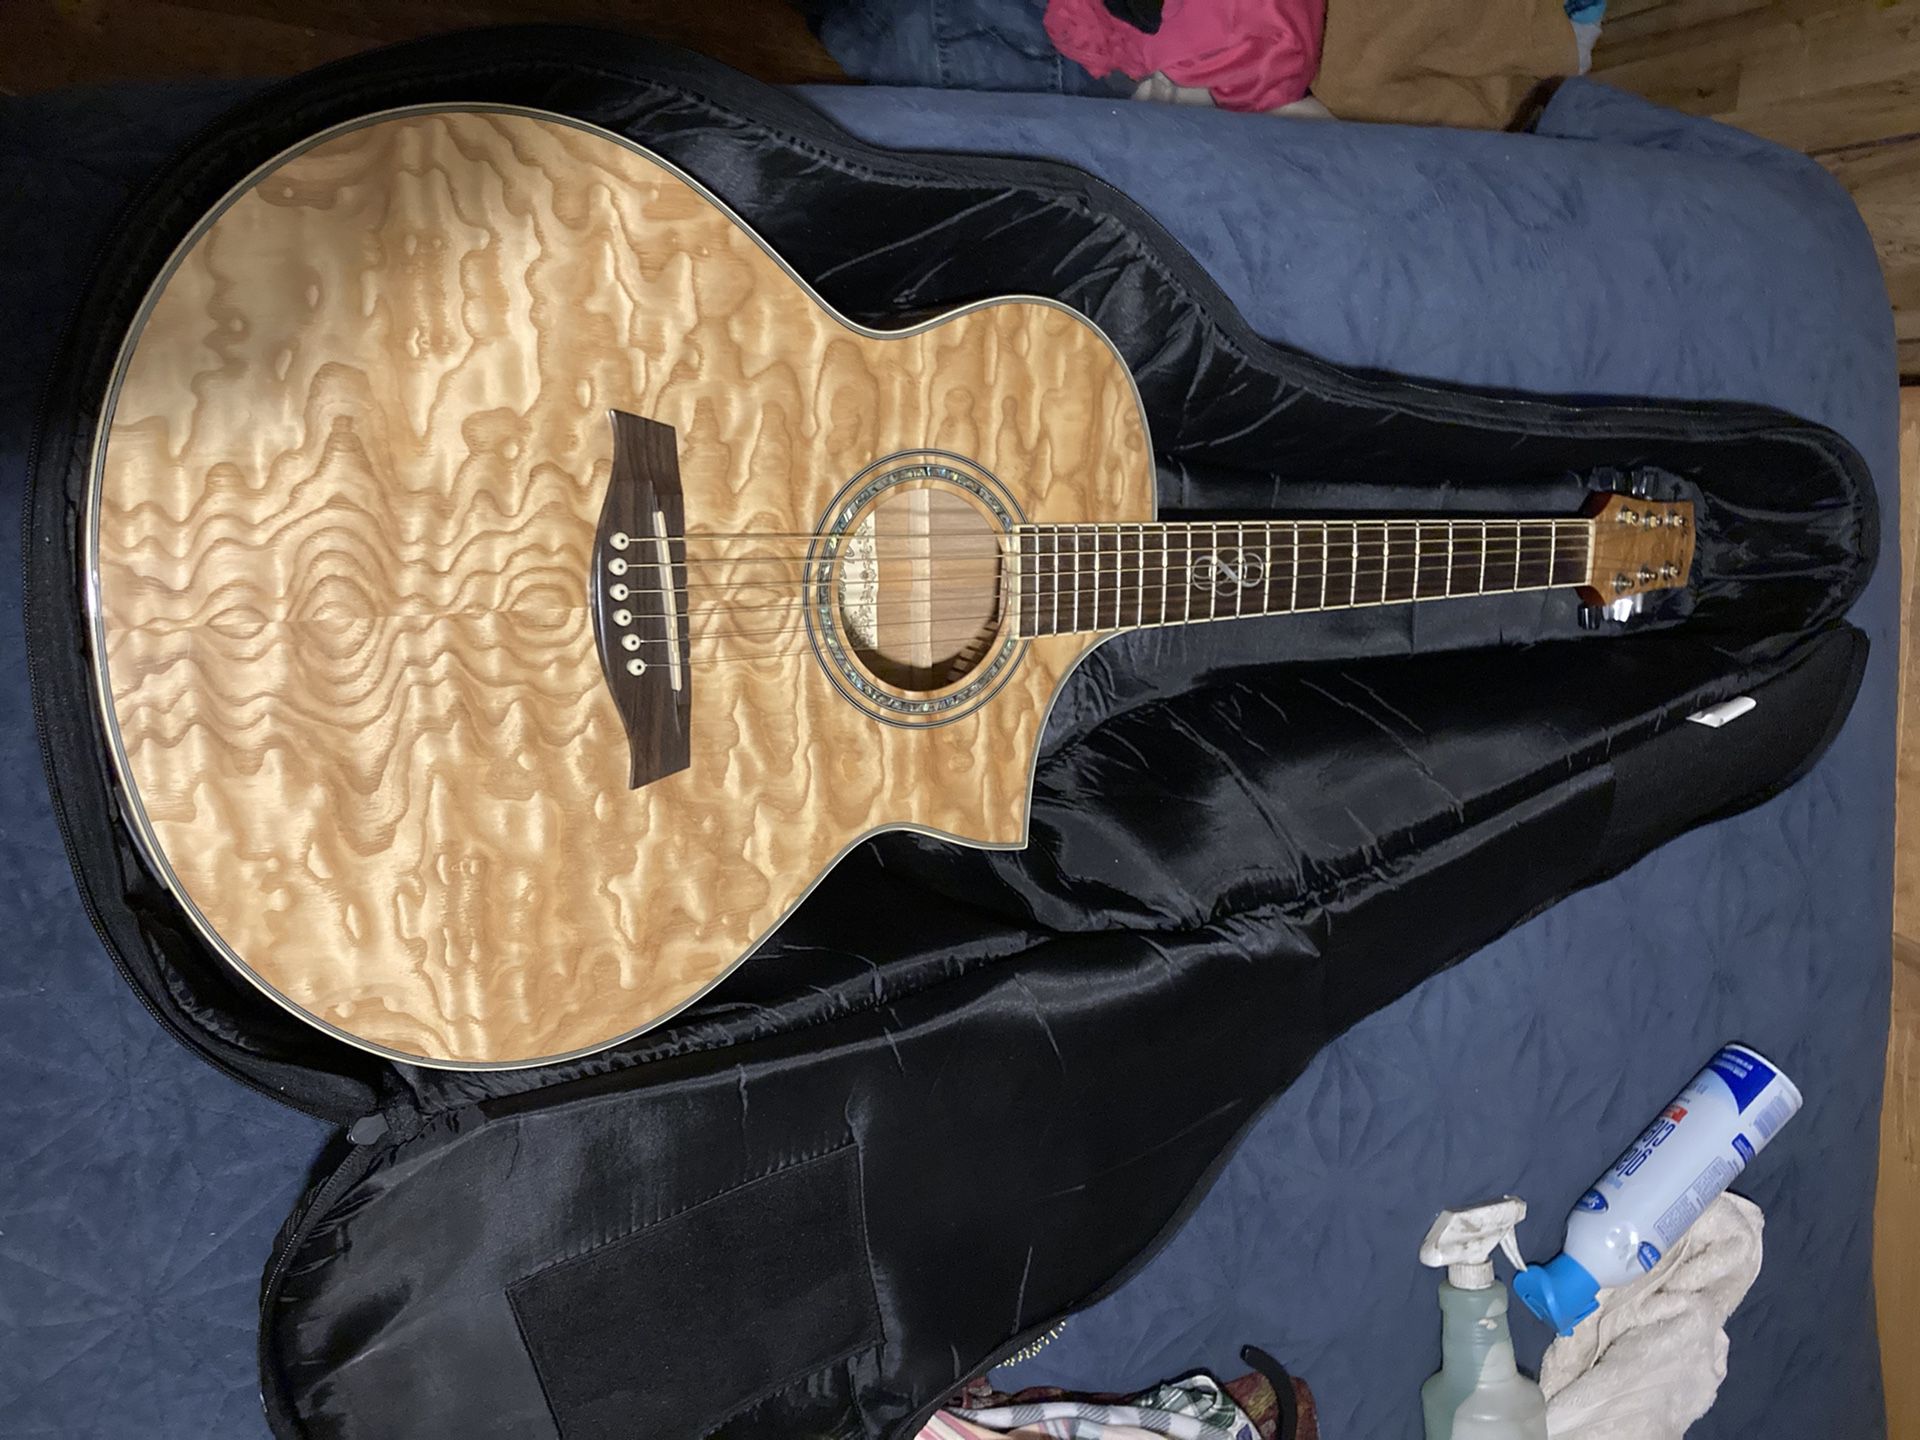 Ibanez acoustic/electric guitar with carry case